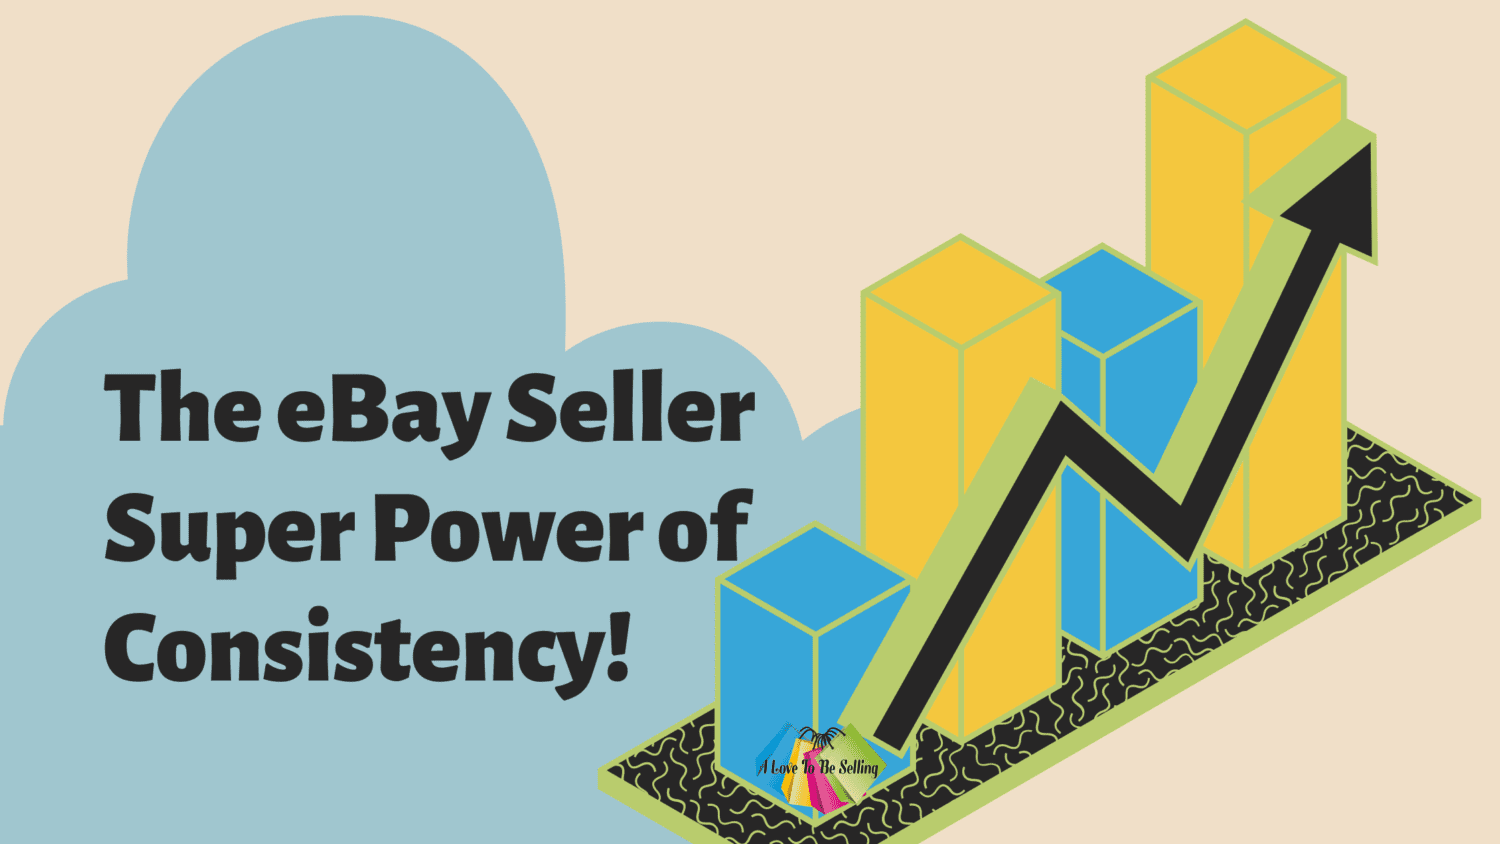 https://ilovetobeselling.com/wp-content/uploads/2022/10/The-eBay-Seller-Super-Power-of-ConsistencyBanner.png